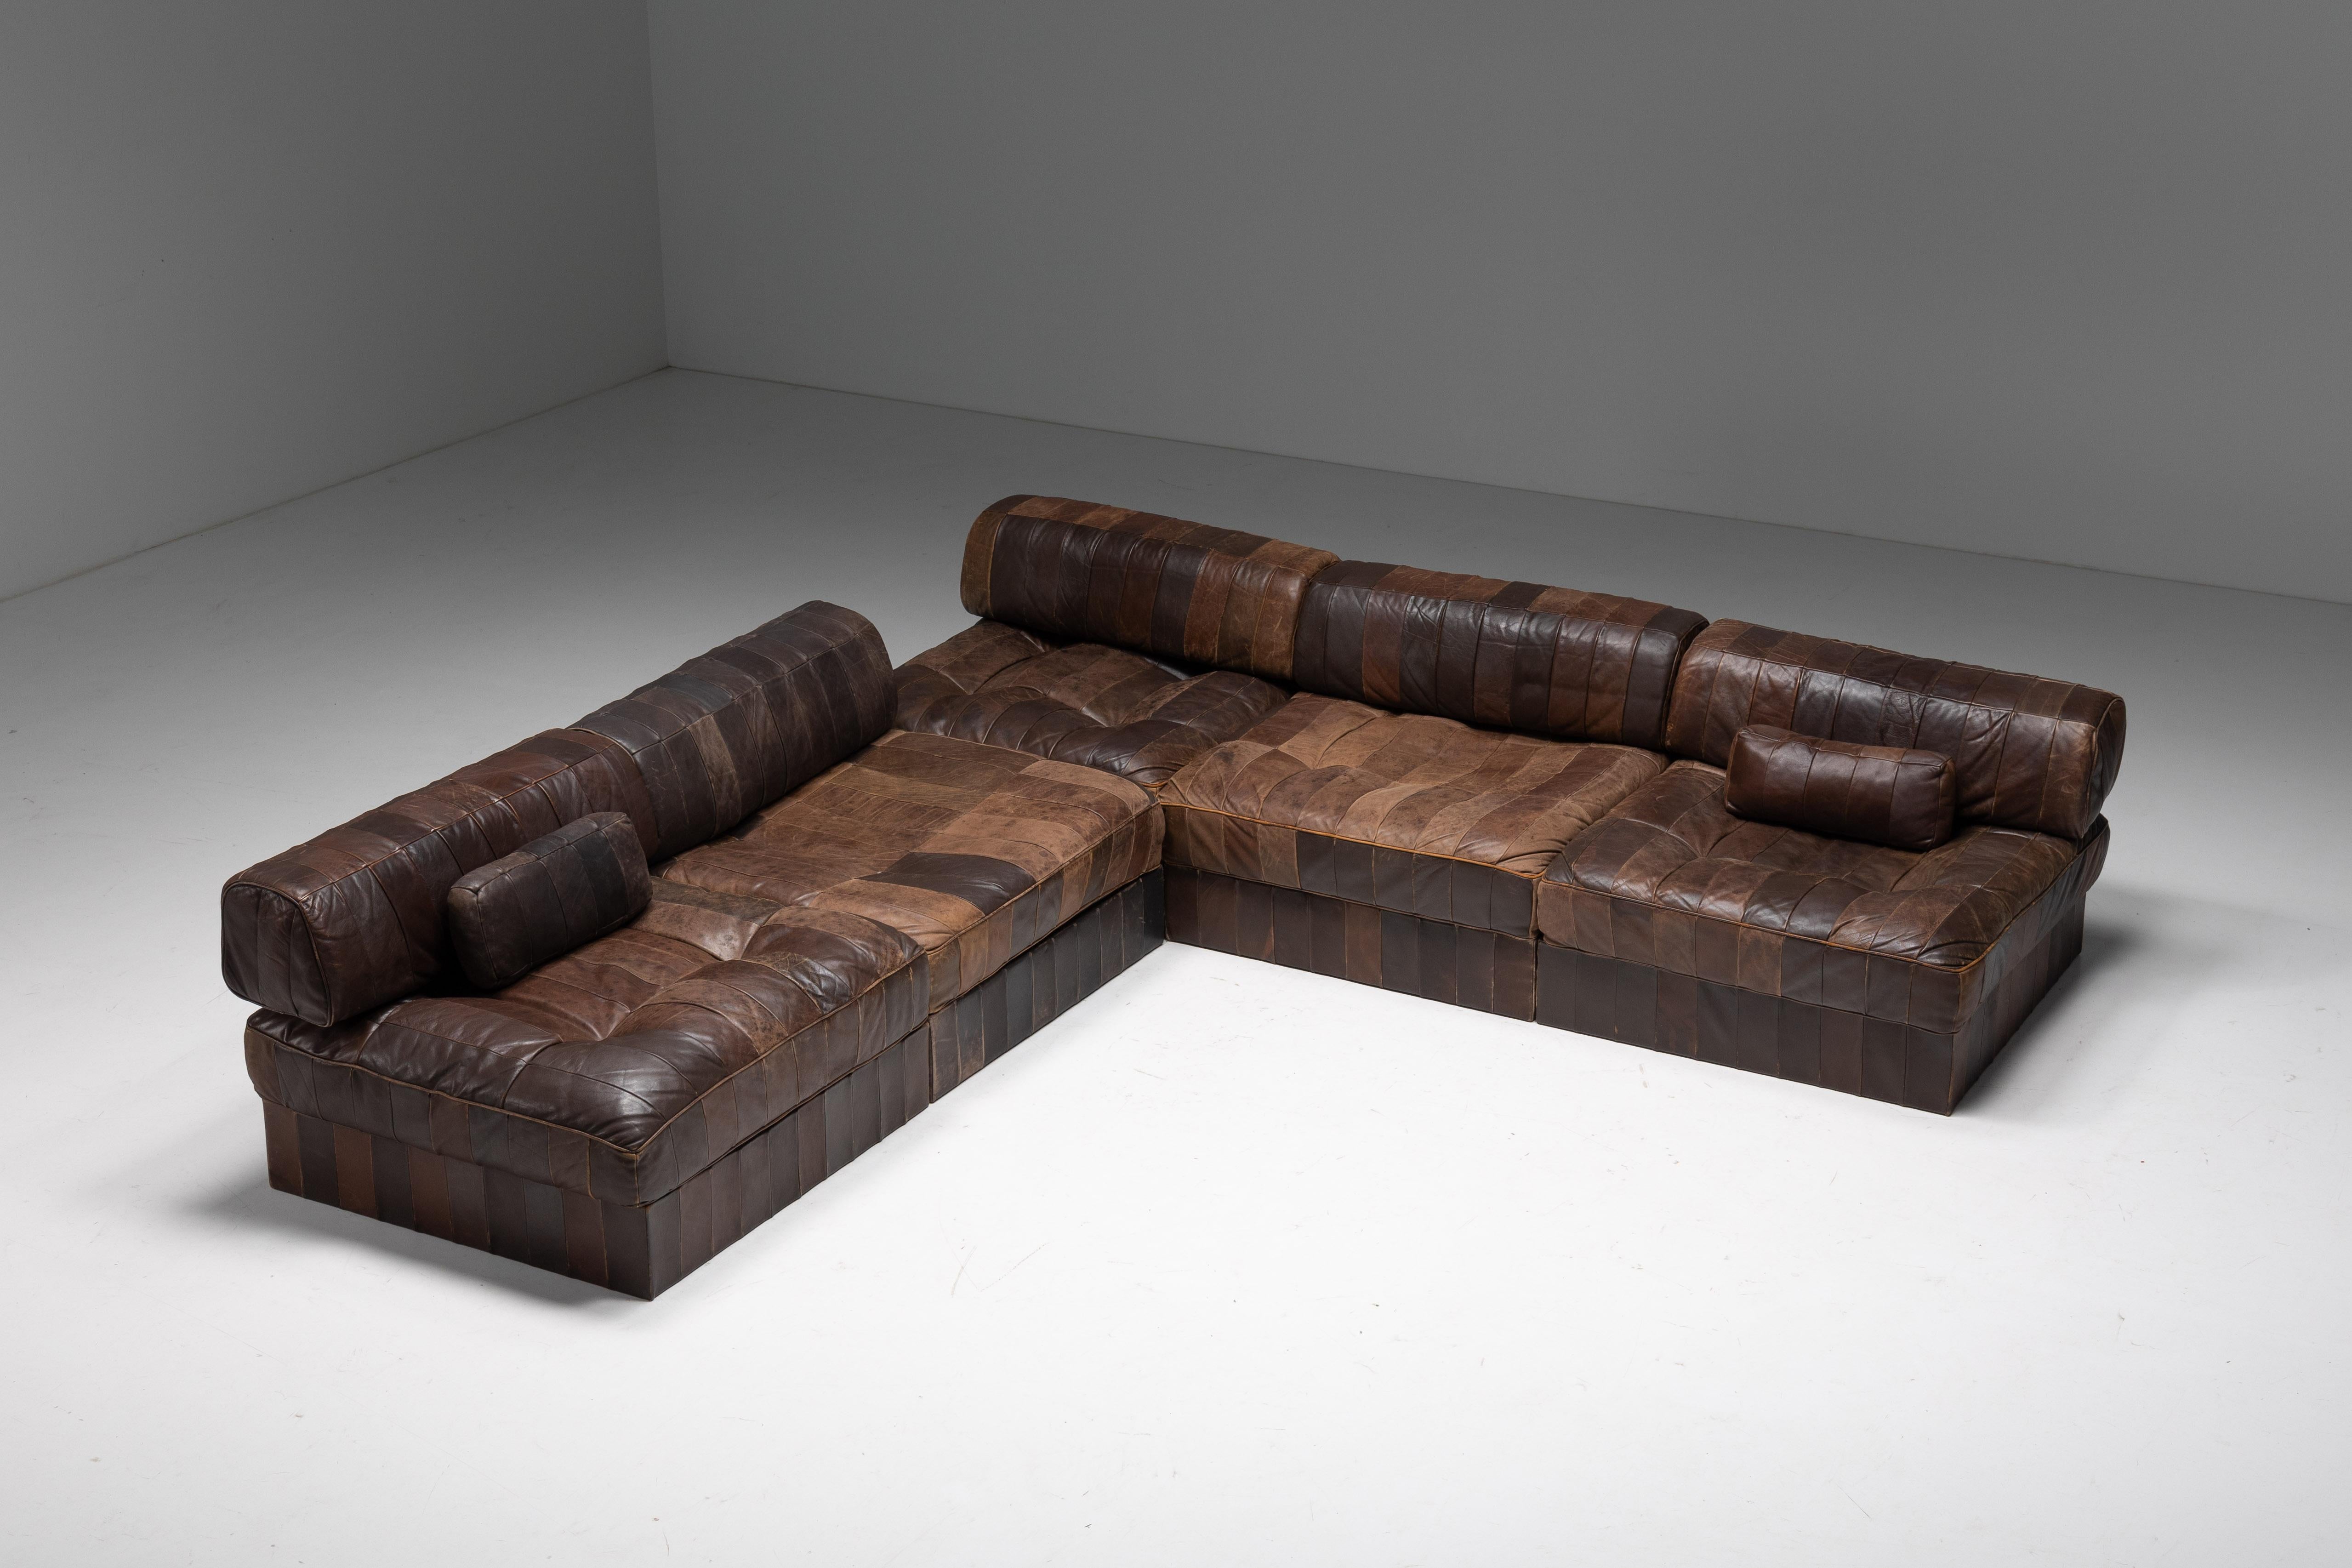 DS 88 patchwork leather sofa, a timeless masterpiece designed and manufactured by De Sede, Switzerland 1970s. Crafted with precision and care, the sofa features rich brown patchwork leather with each element consisting of a soft base cushion and a